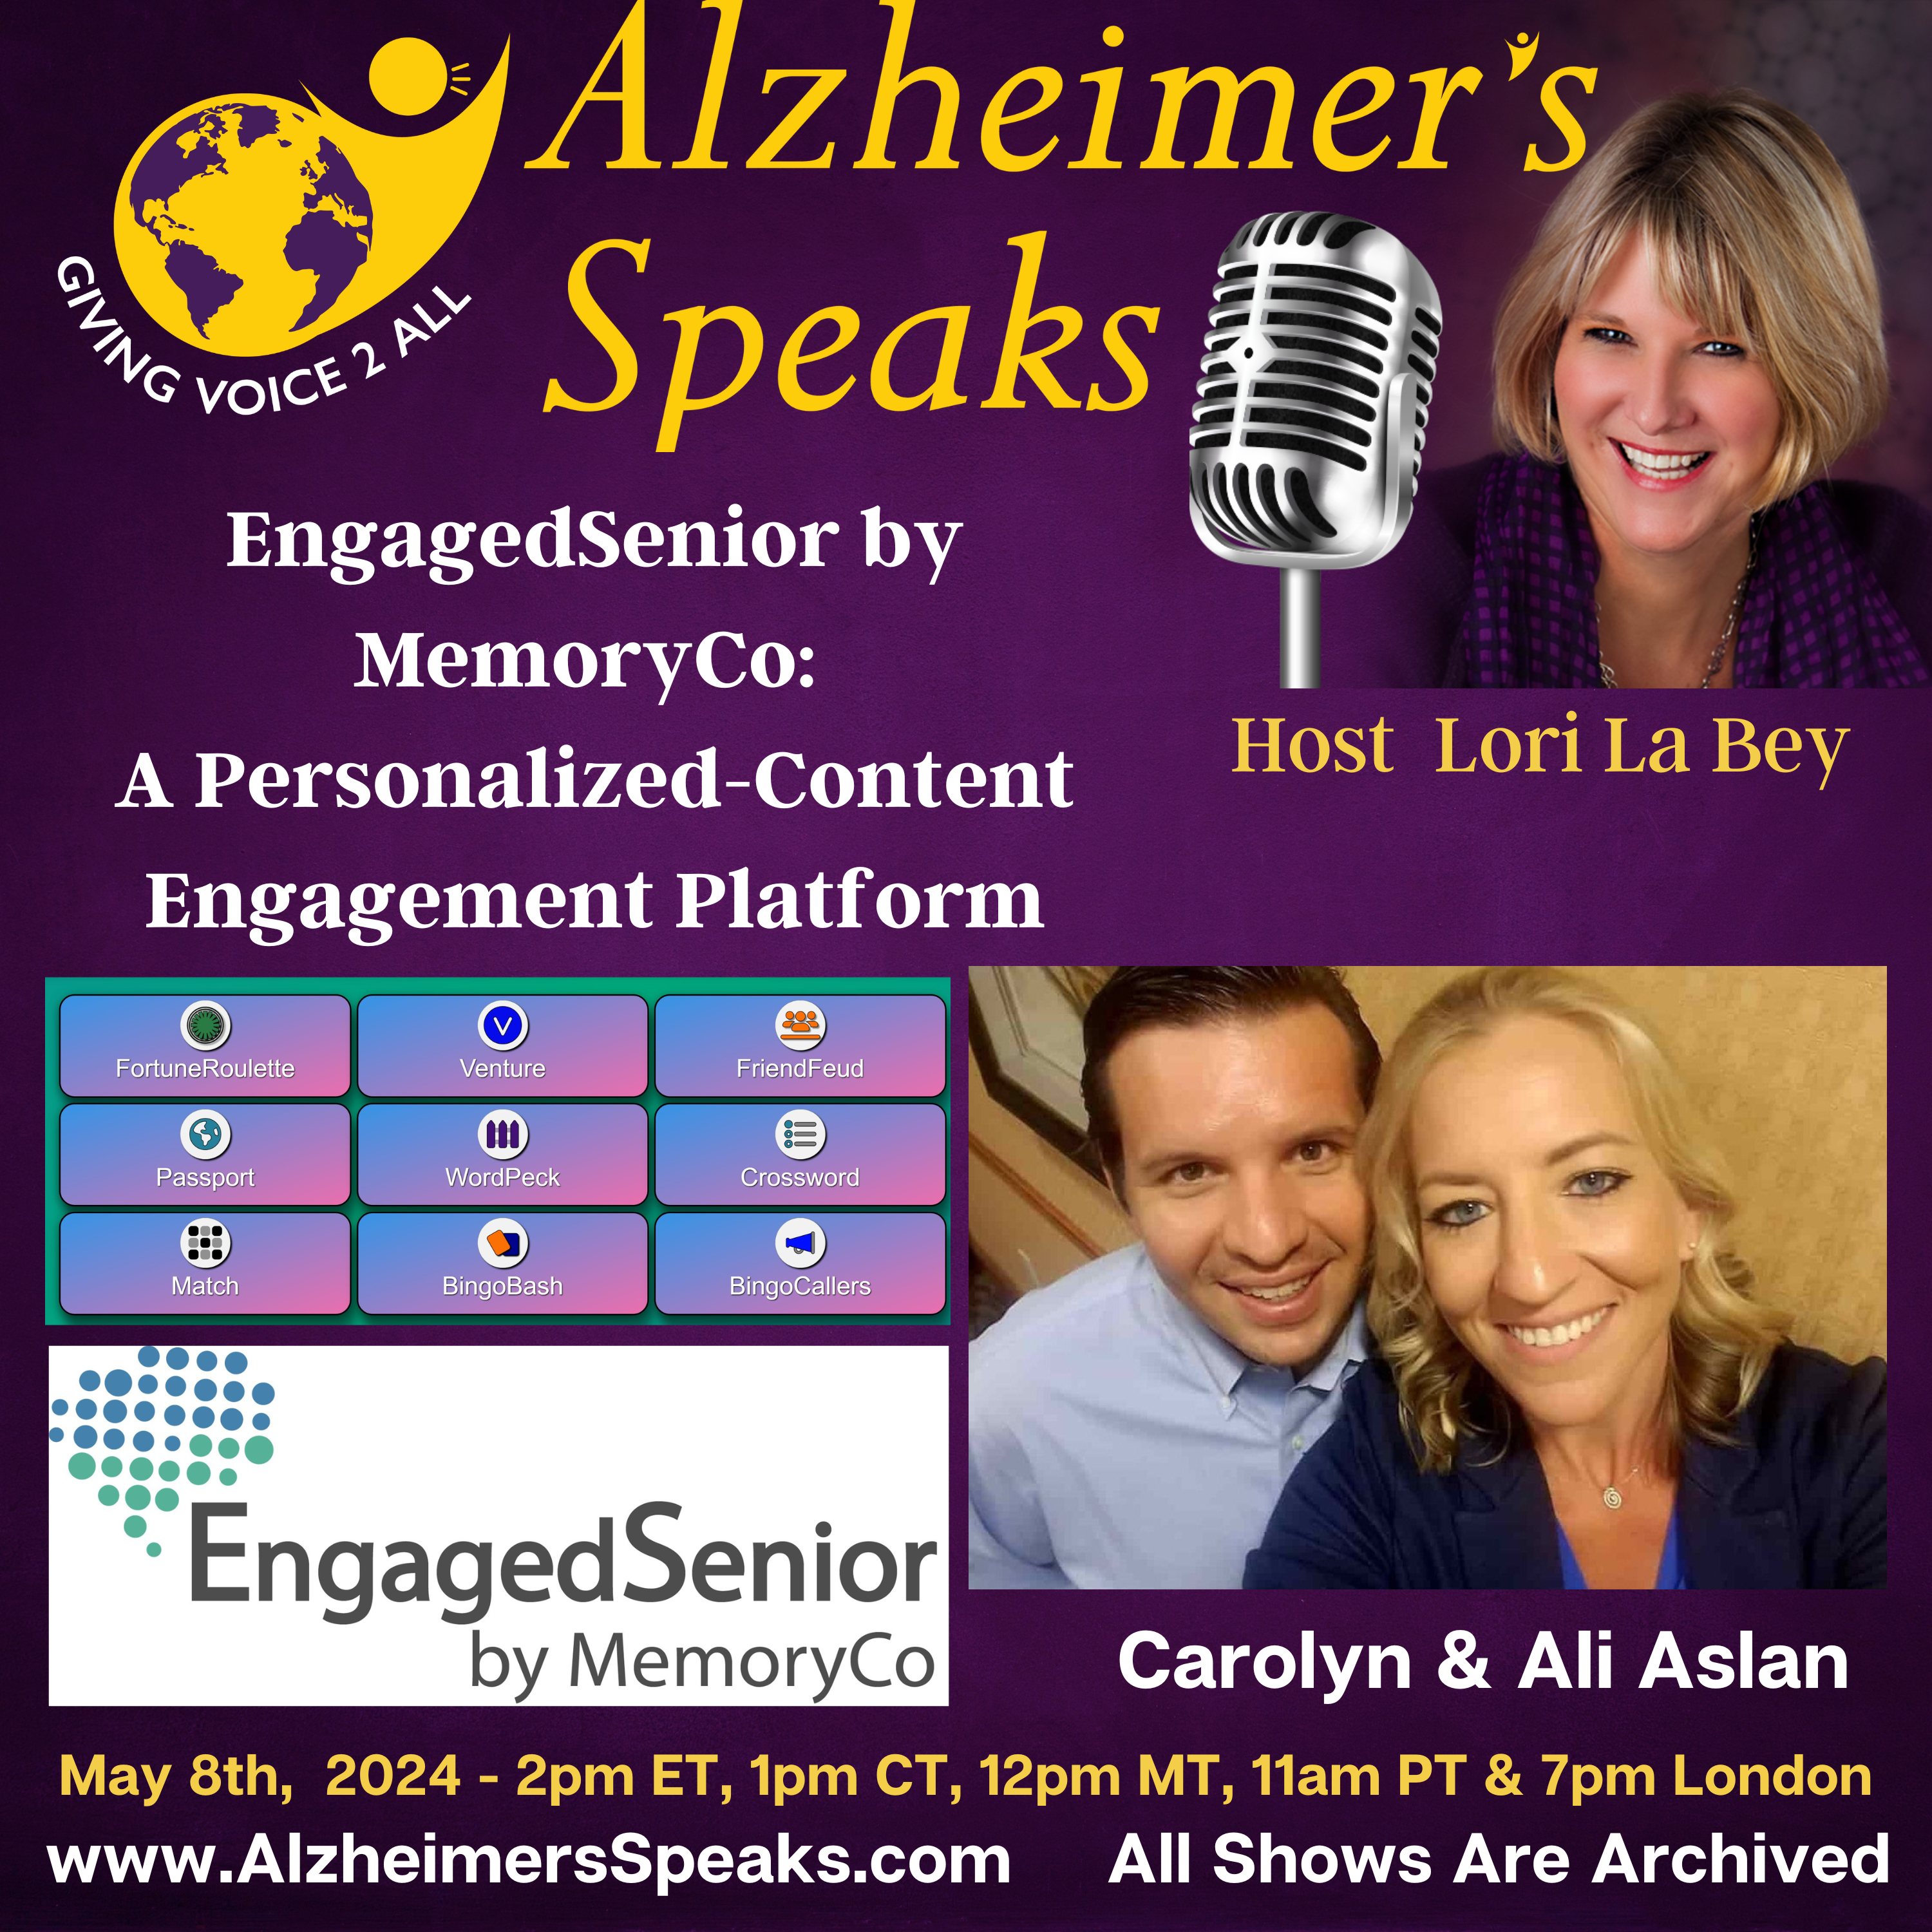 EngagedSenior by MemoryCo: A Personalized-Content Engagement Platform